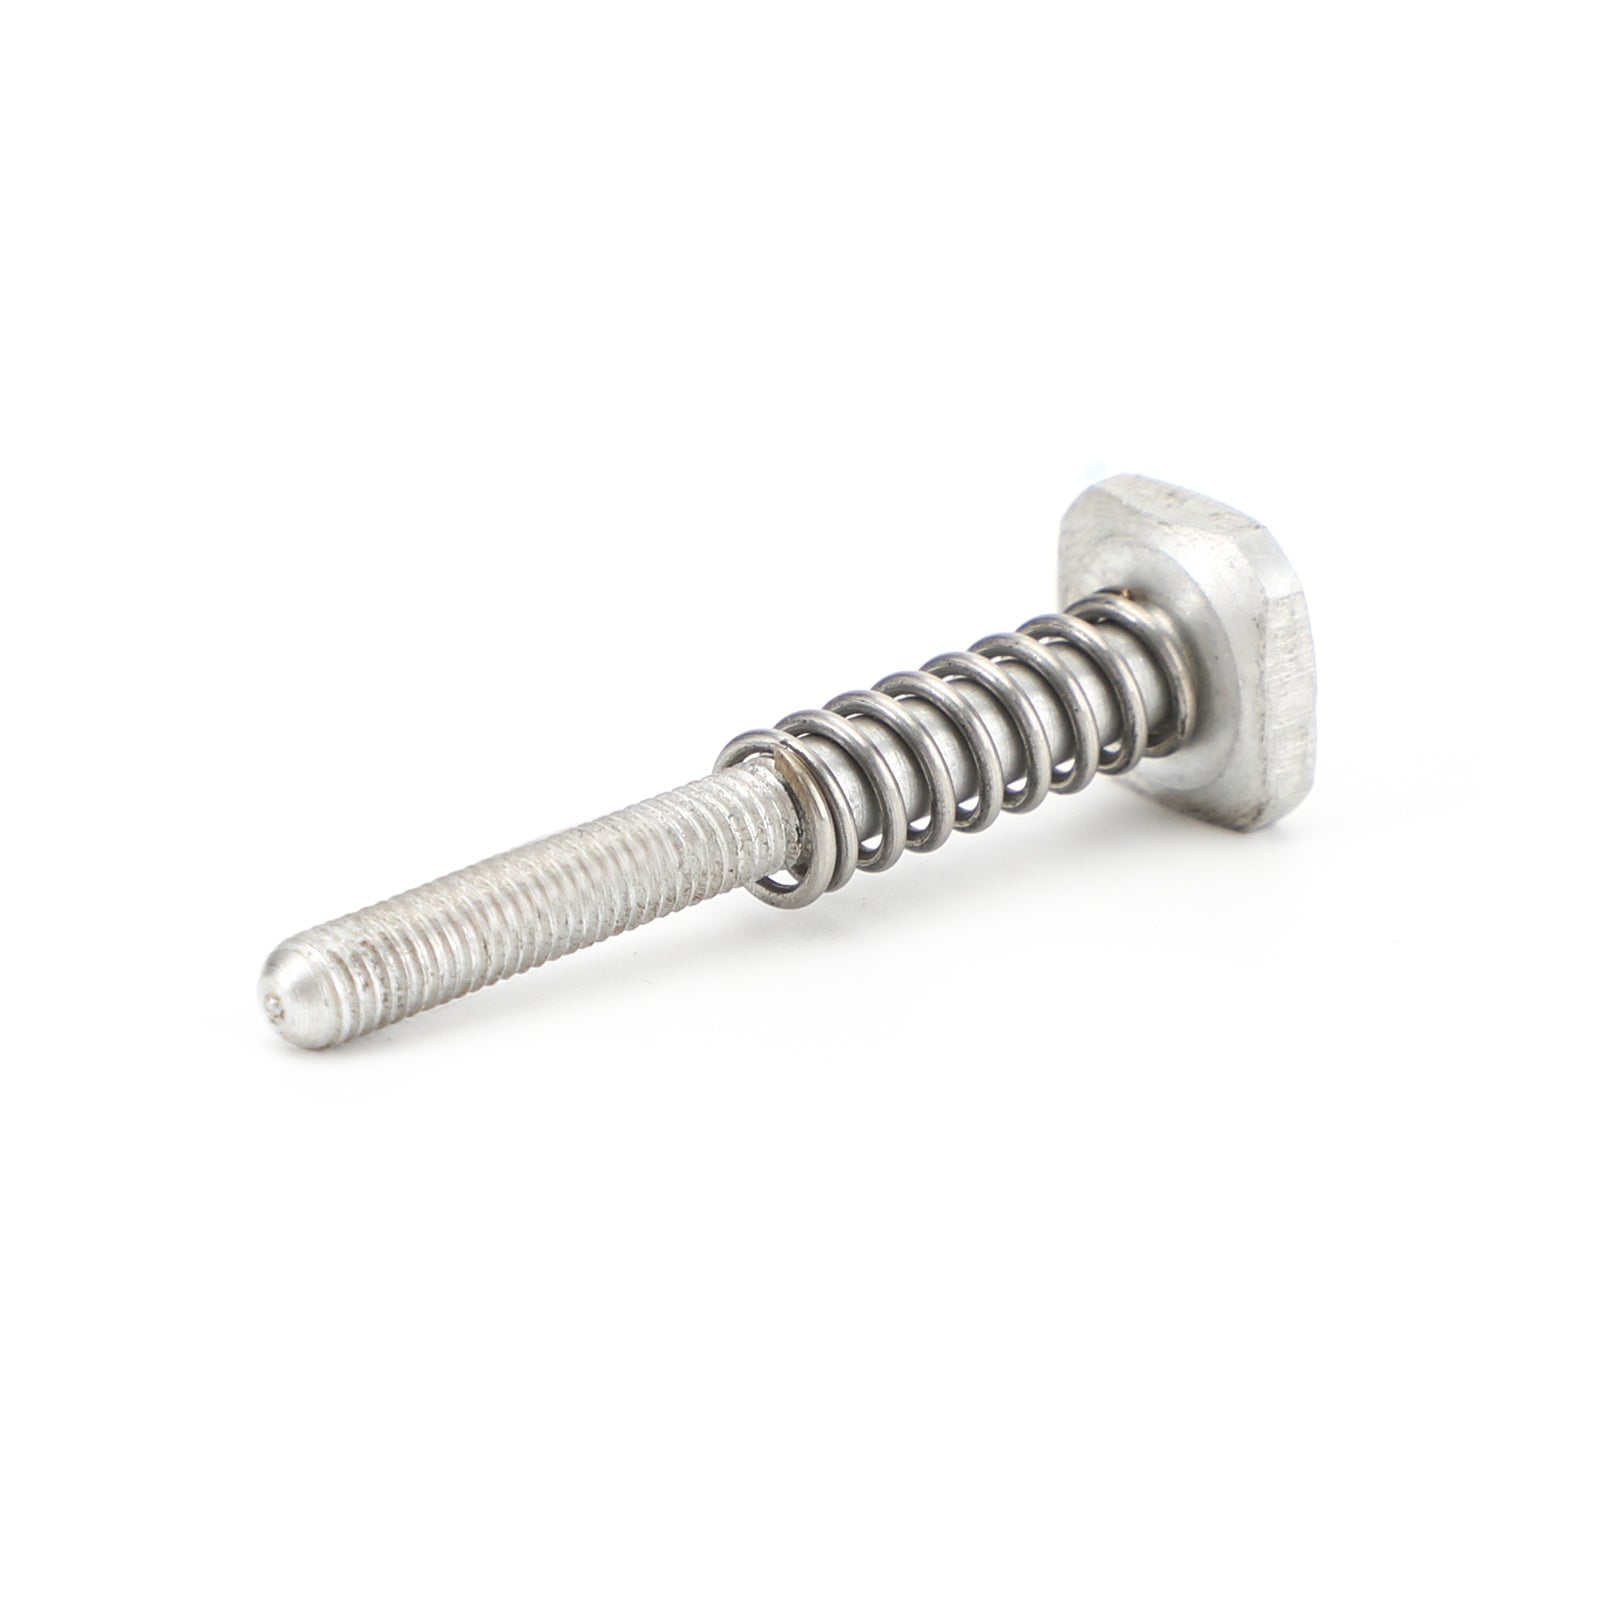 Gas EX 300 2021 Gas EC 250 300 2020-2021 Easy Adjust Idle Tick Over Screw with Spring